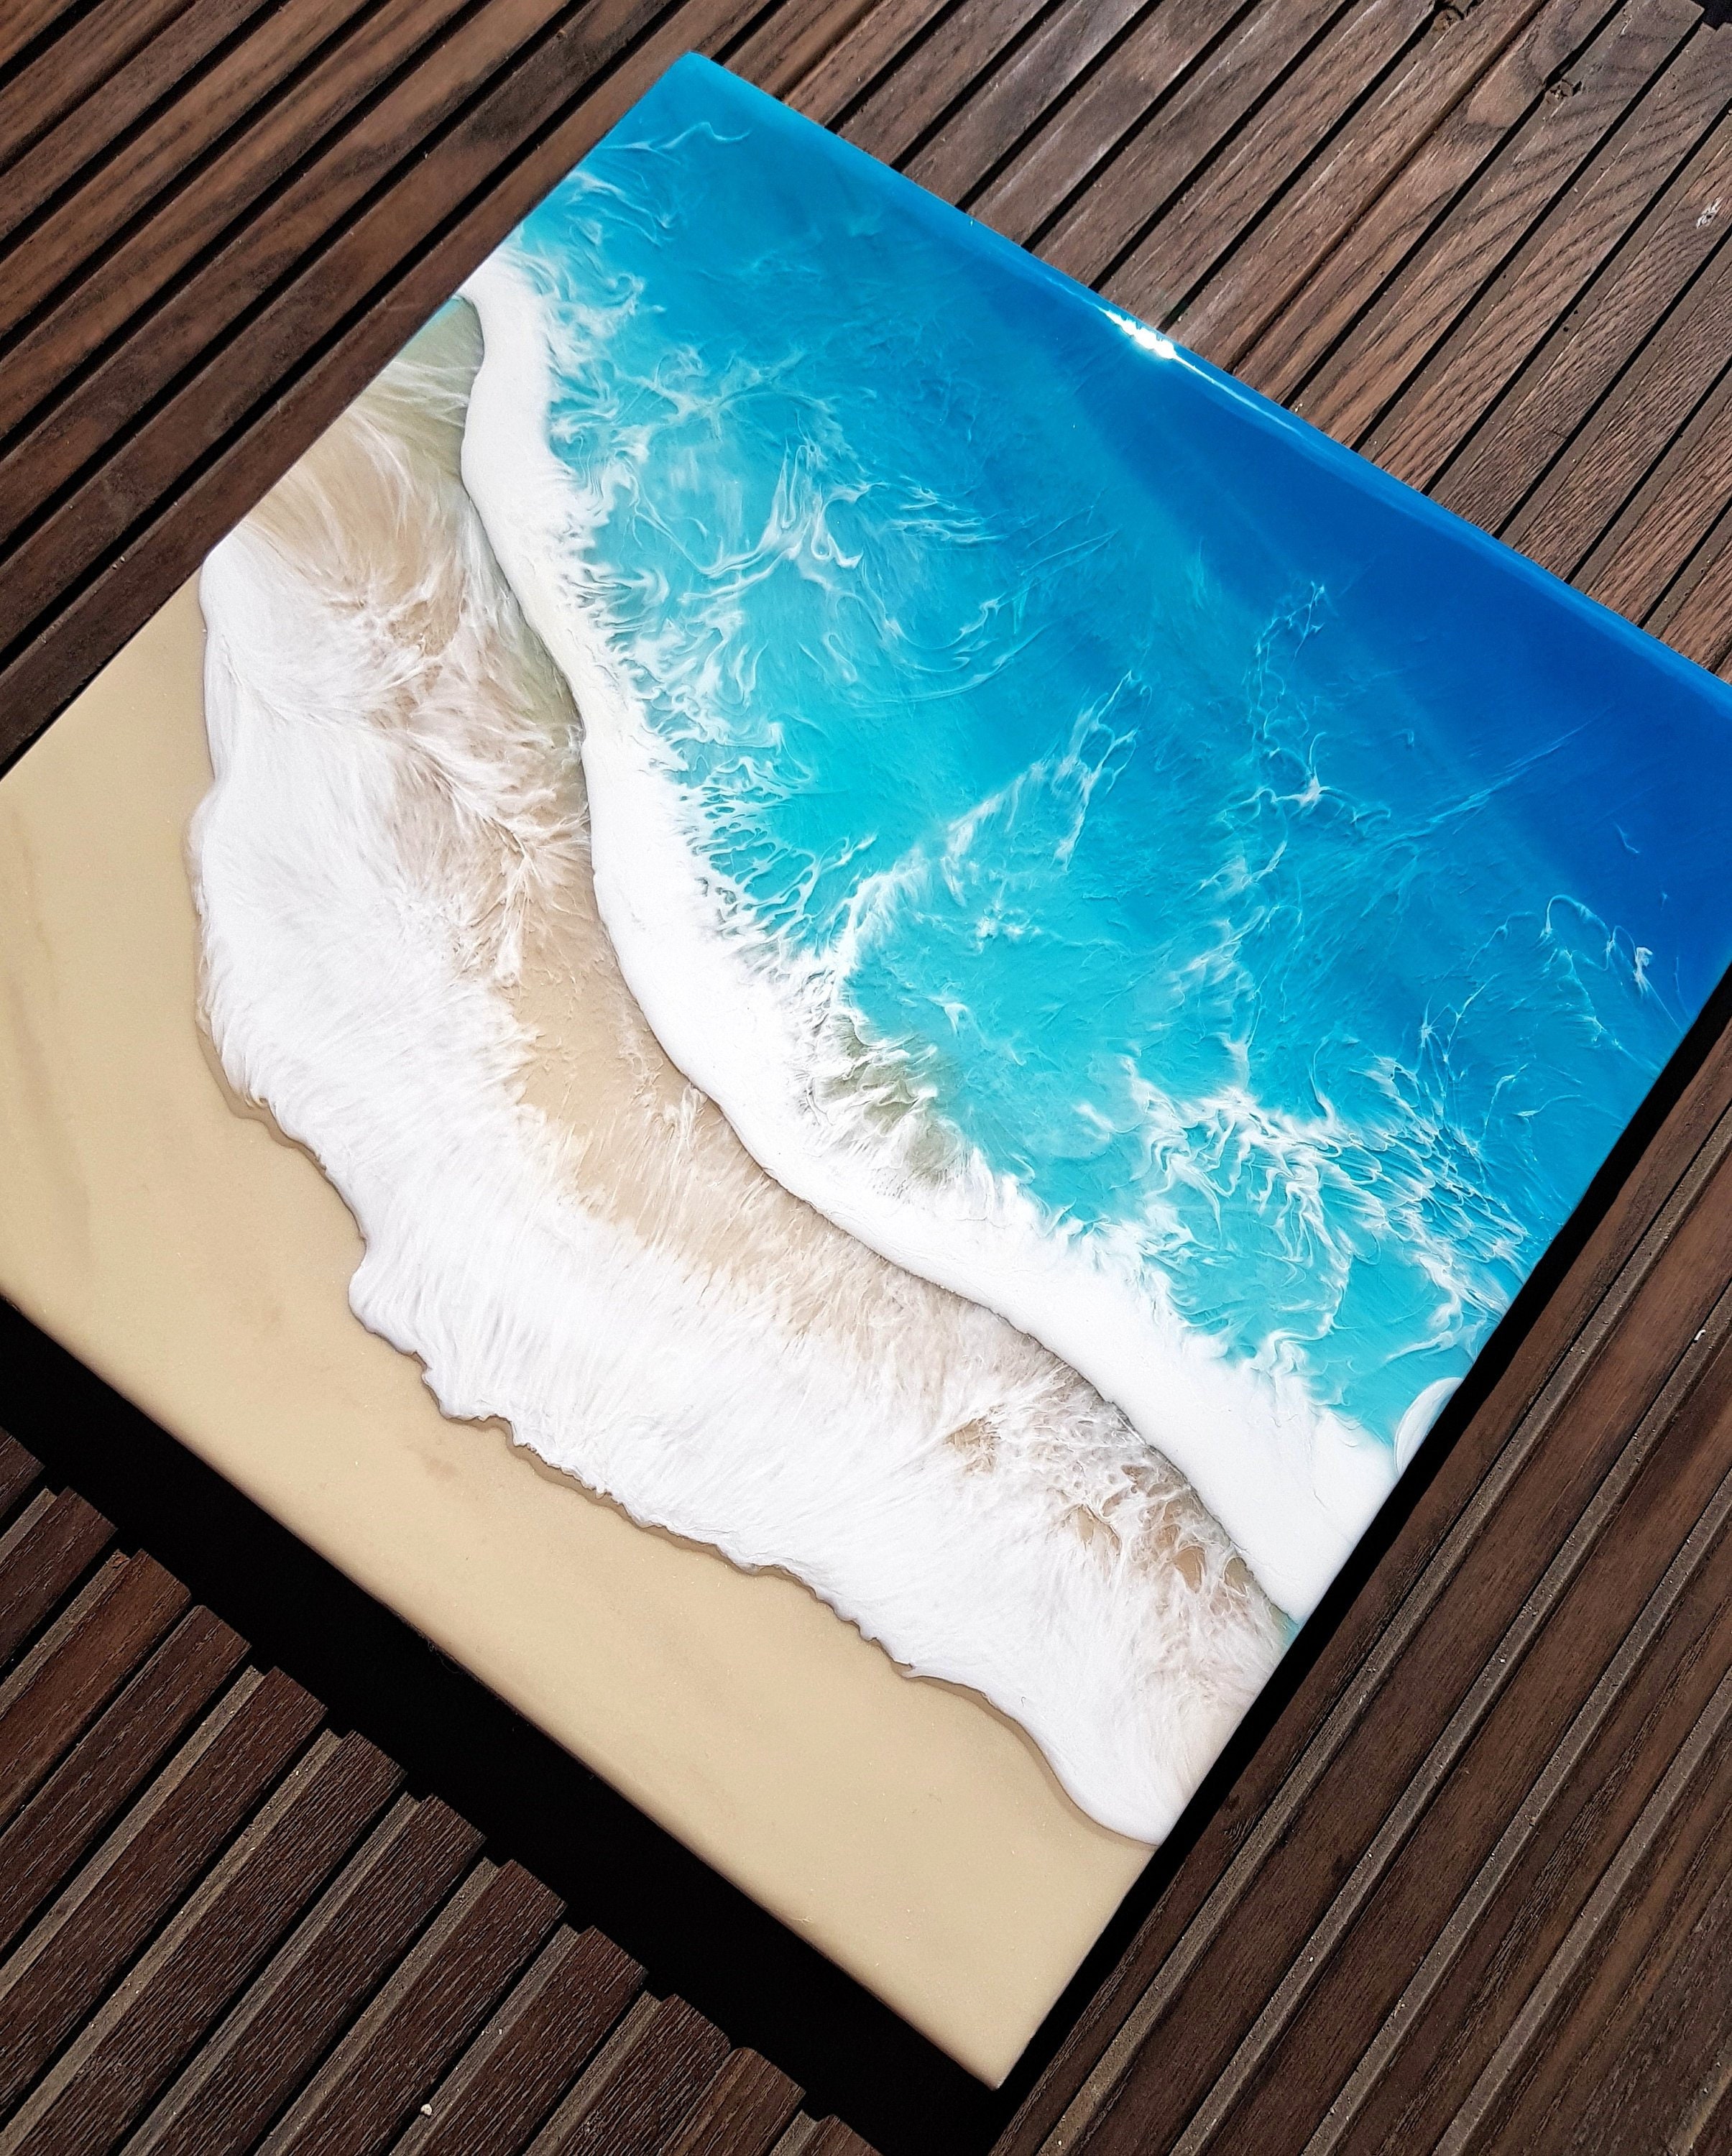 Epoxy Resin Art Celebrates the Beauty of the Untouched Ocean